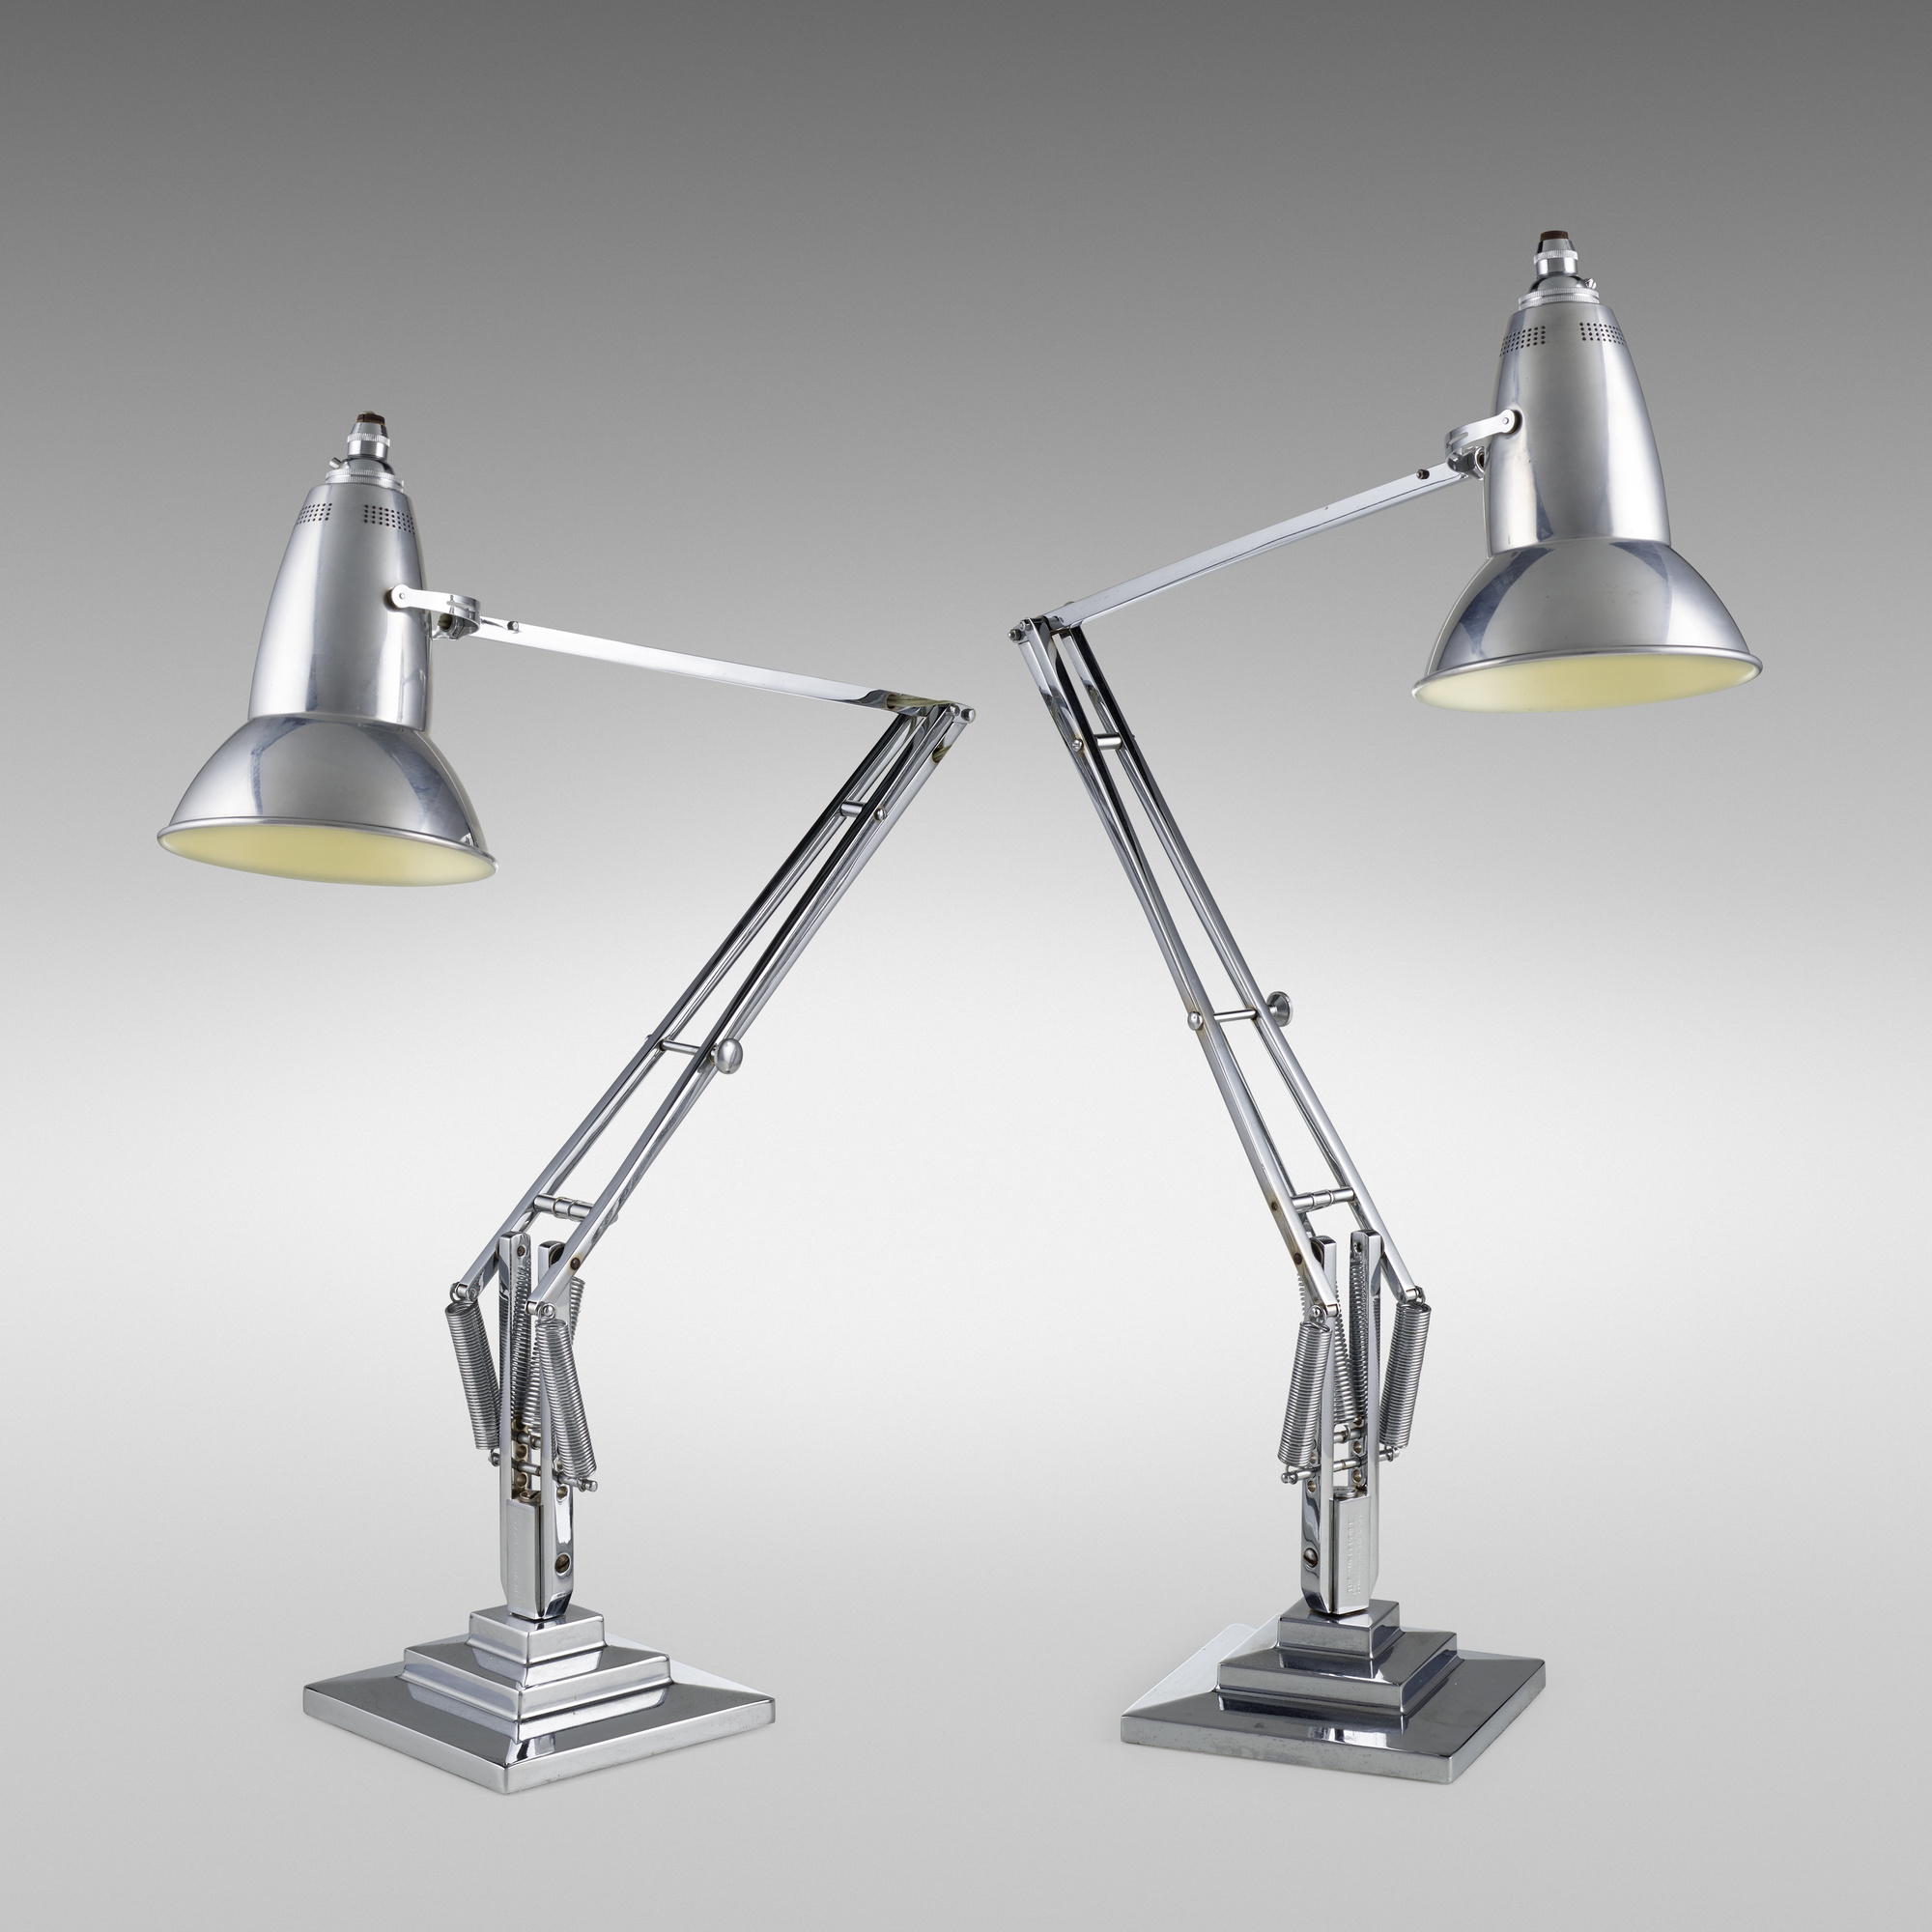 396: GEORGE CARWARDINE, Anglepoise pair Object & Home, November 2021 < Auctions | Rago